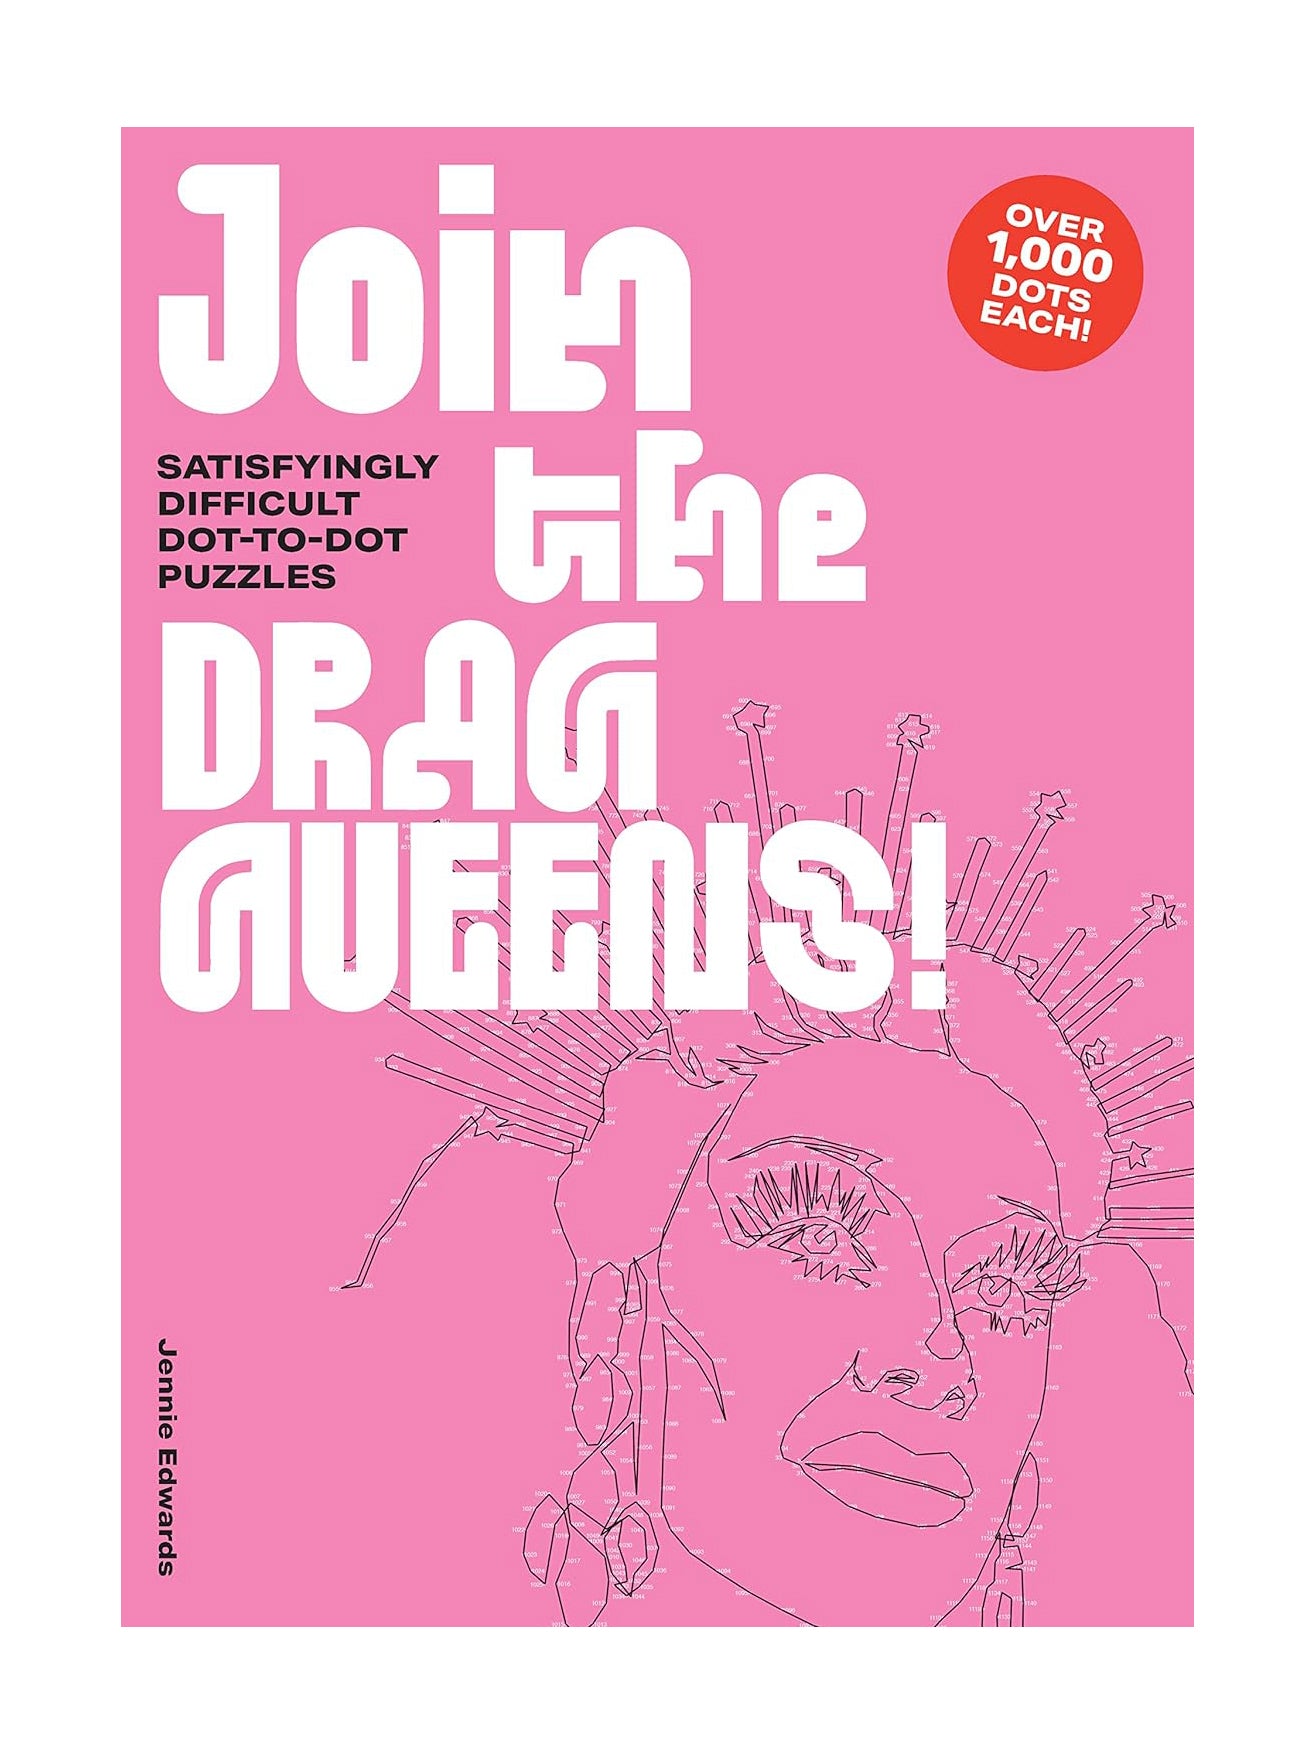 Join the Drag Queens, Join the dots puzzle book